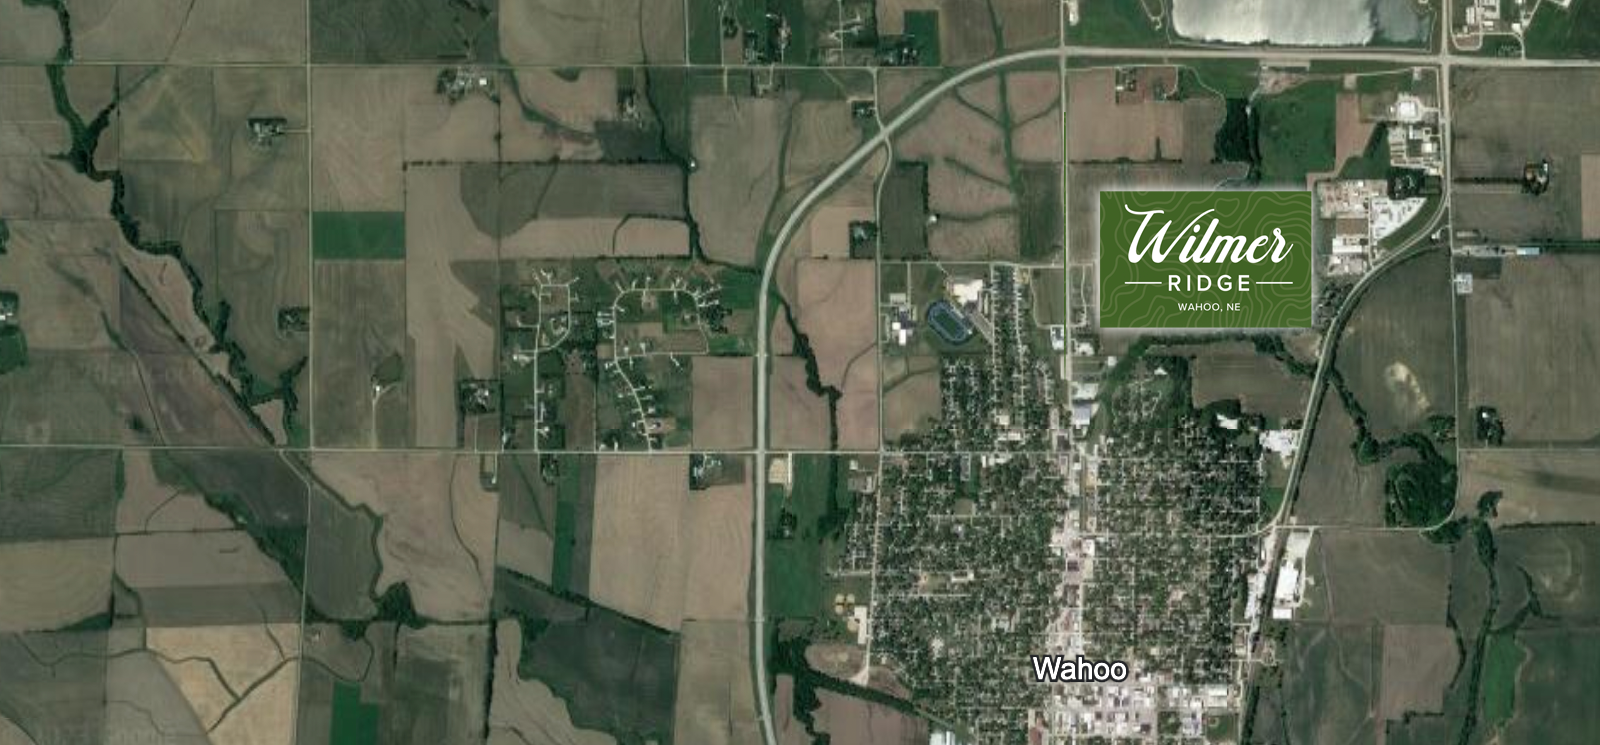 Wilmer Ridge development, map from Google Earth that shows approximate location of development.